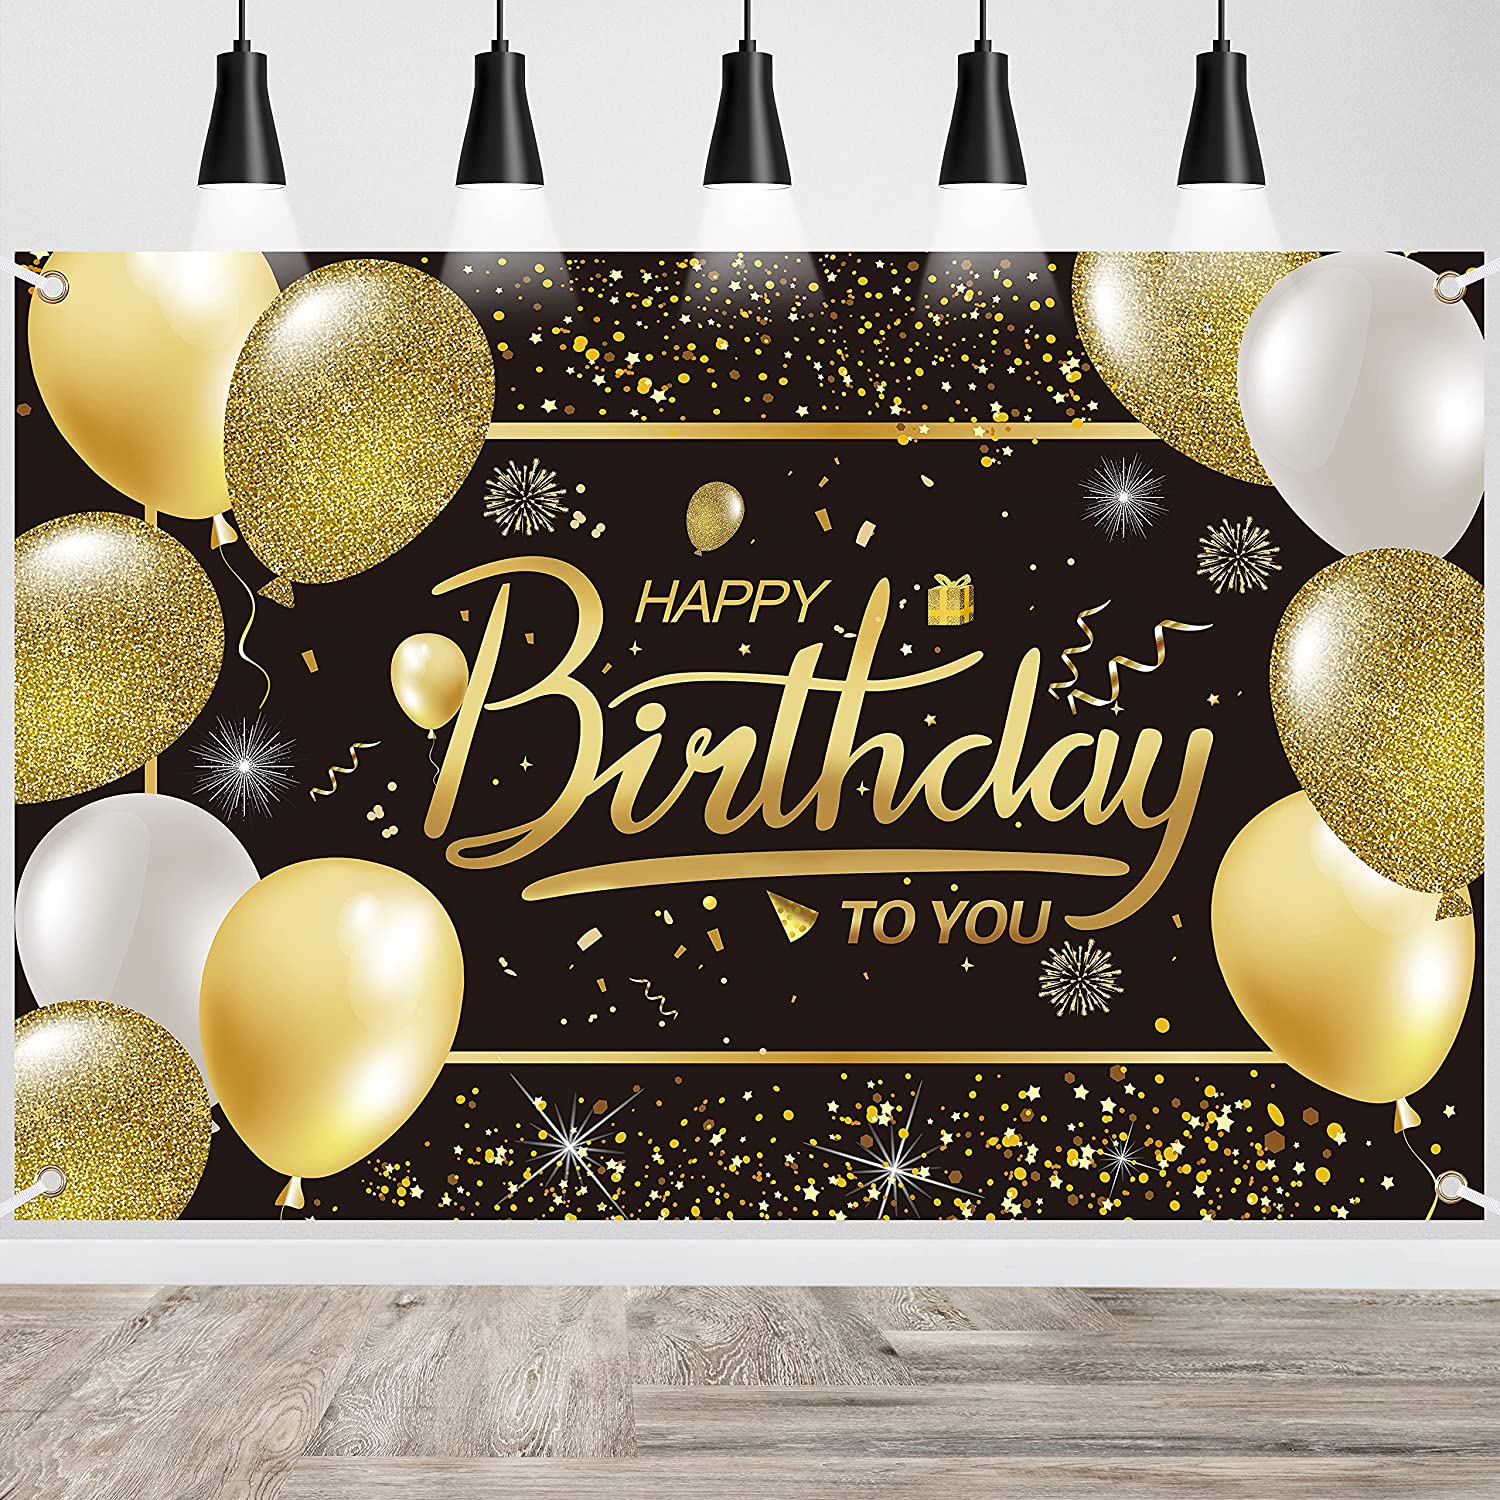 Decorative background for birthday parties